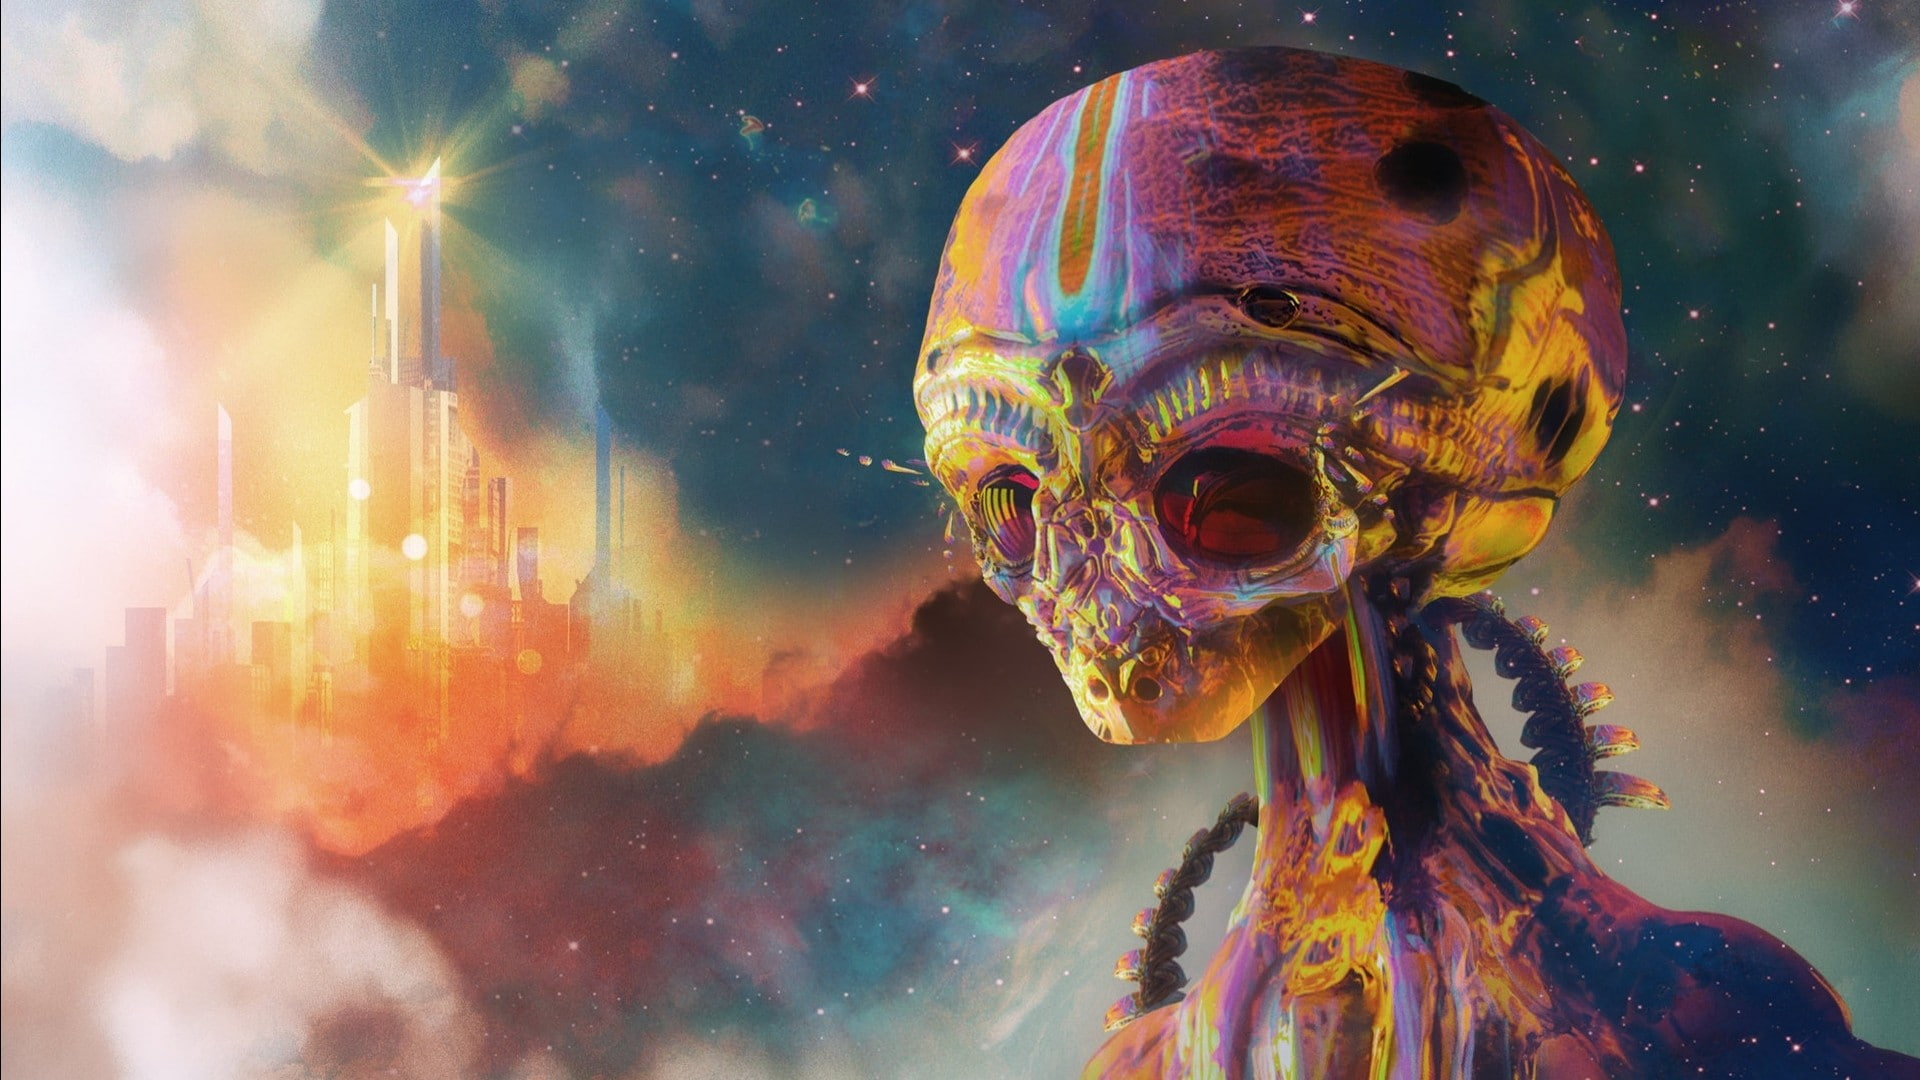 Digital Art, Aliens, Psychedelic, Colorful, Science Fiction